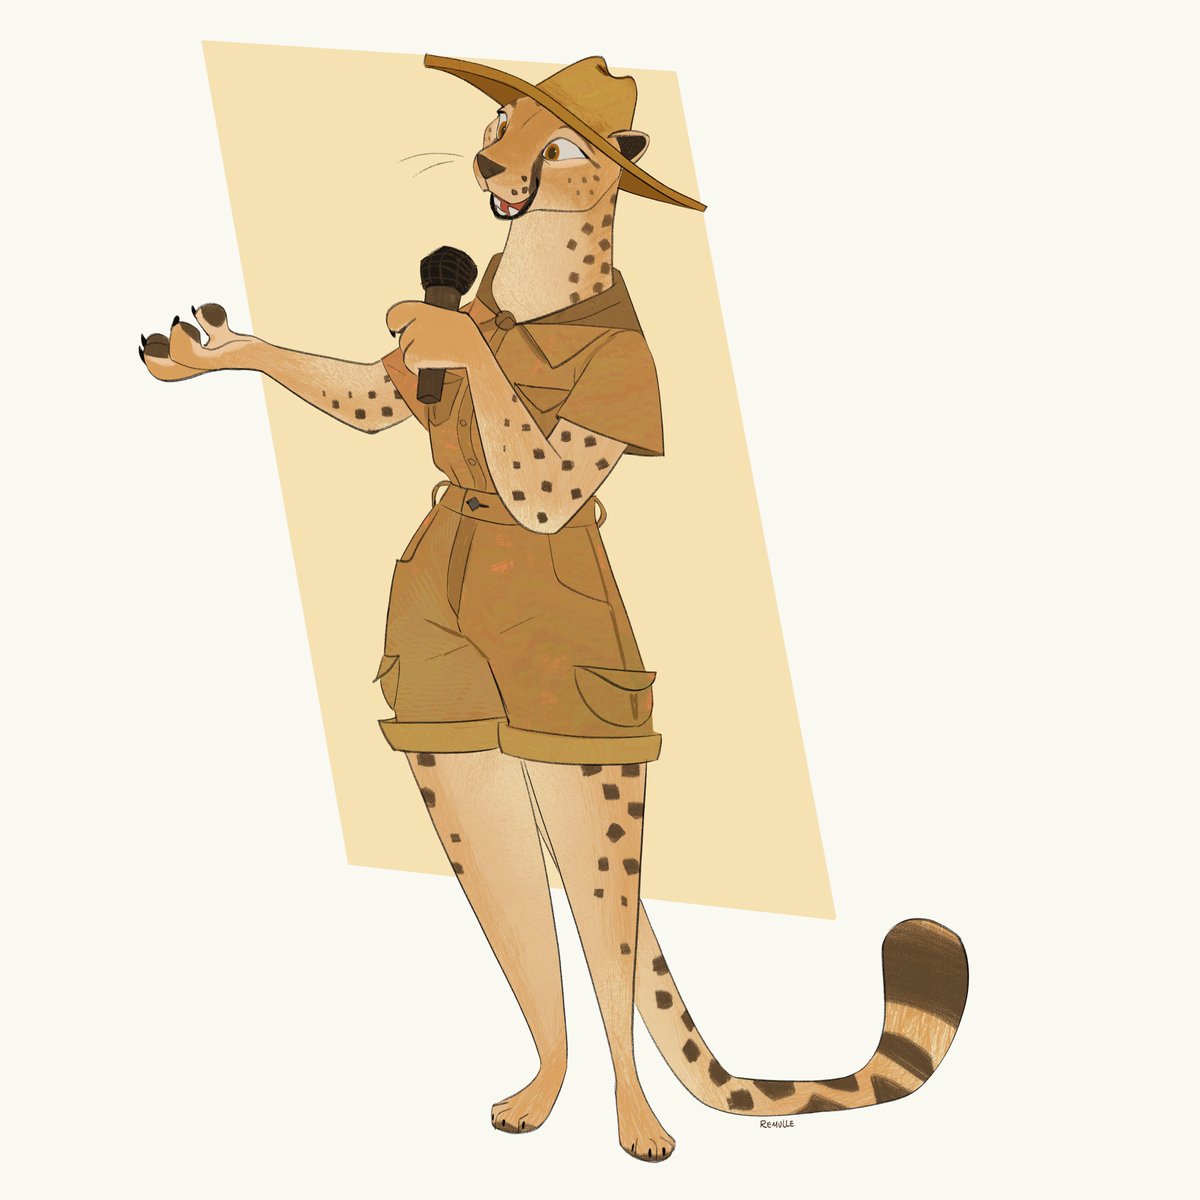 「A doodly @/savannahcheetah! 」|Remulleのイラスト